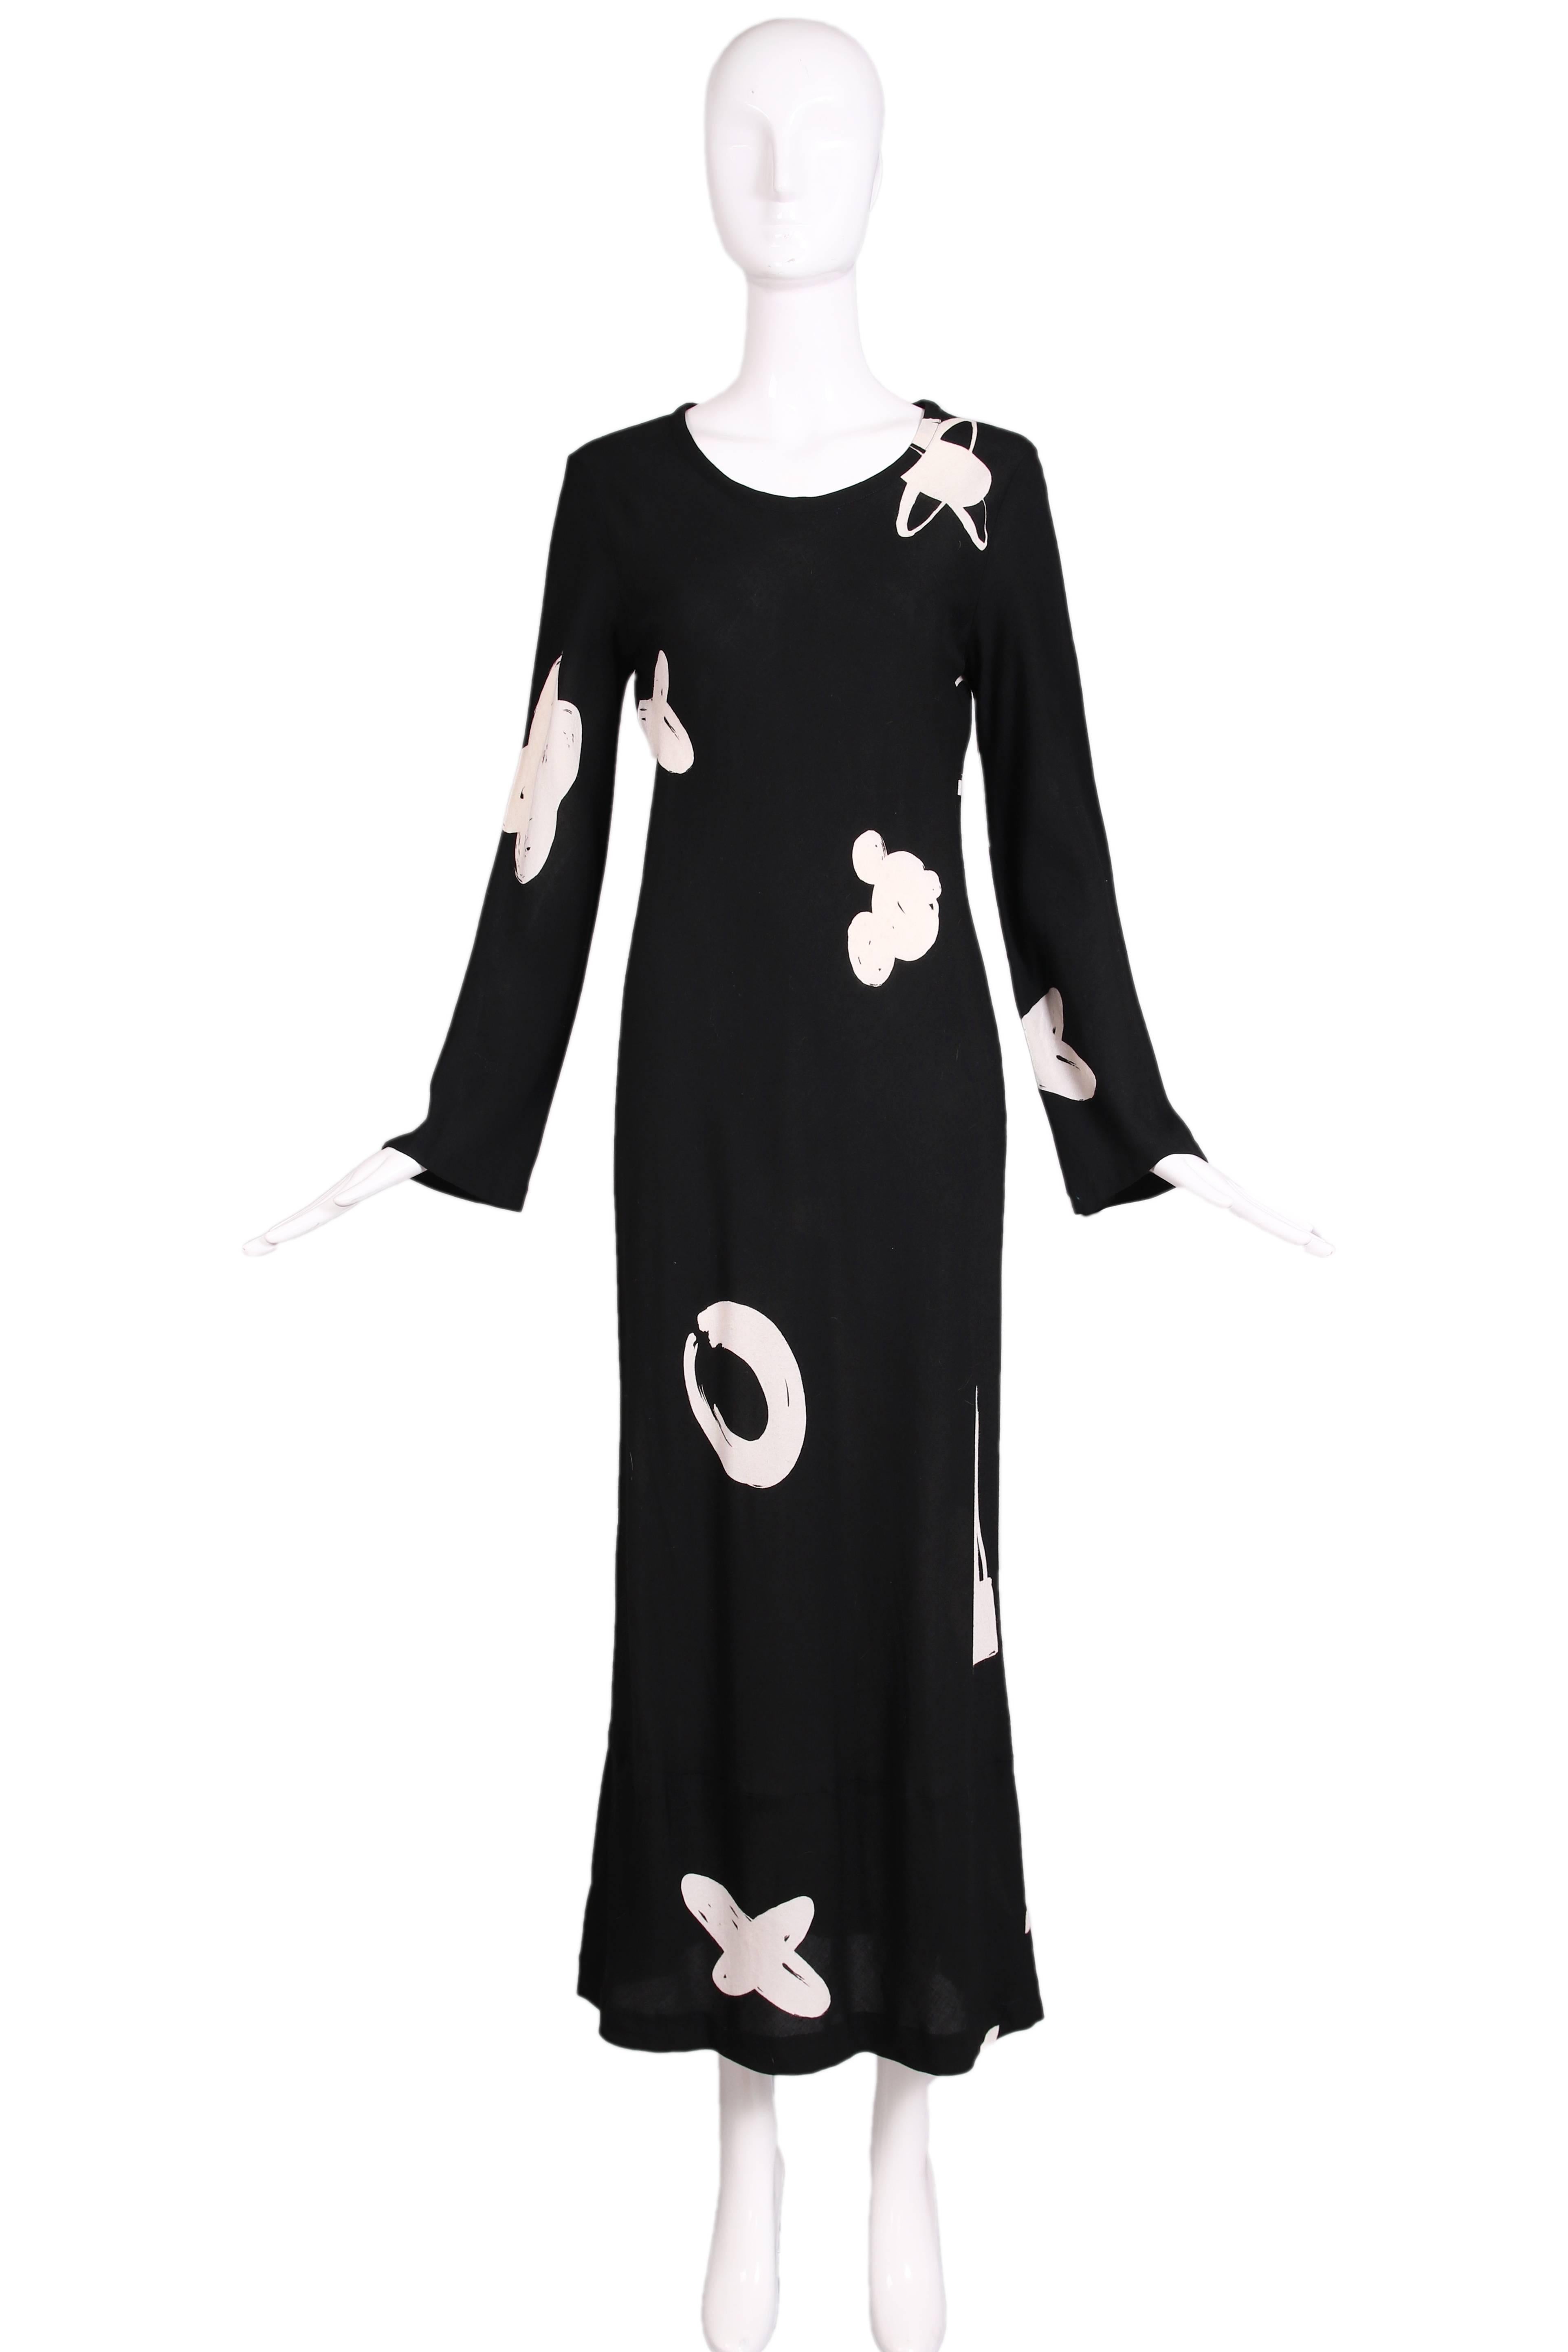 Rare 1980's Comme de Garcons with Robe de Chambre label. This dress is a black cotton maxi with long sleeves, a scooped neckline and featuring a white abstract interpretations of planets, mickey mouse, airplanes, etc.  In excellent condition. No